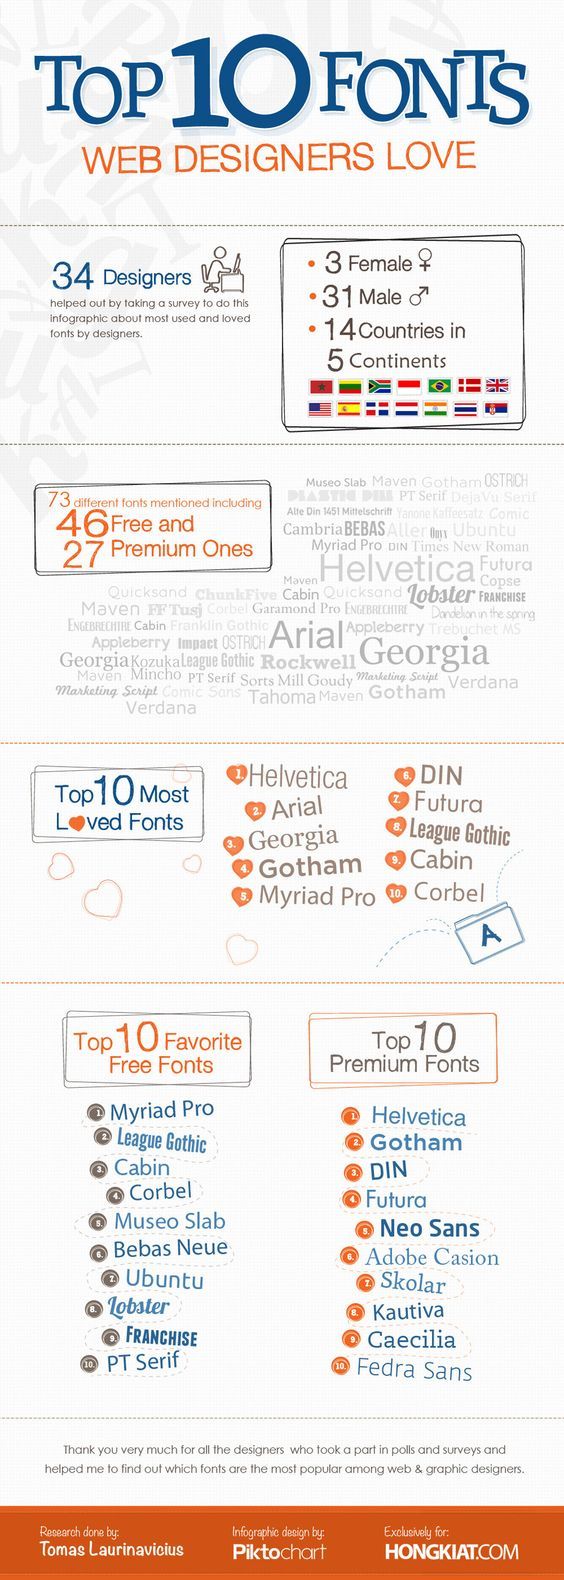 Top 10 Fonts Web Designers Love [Infographic]